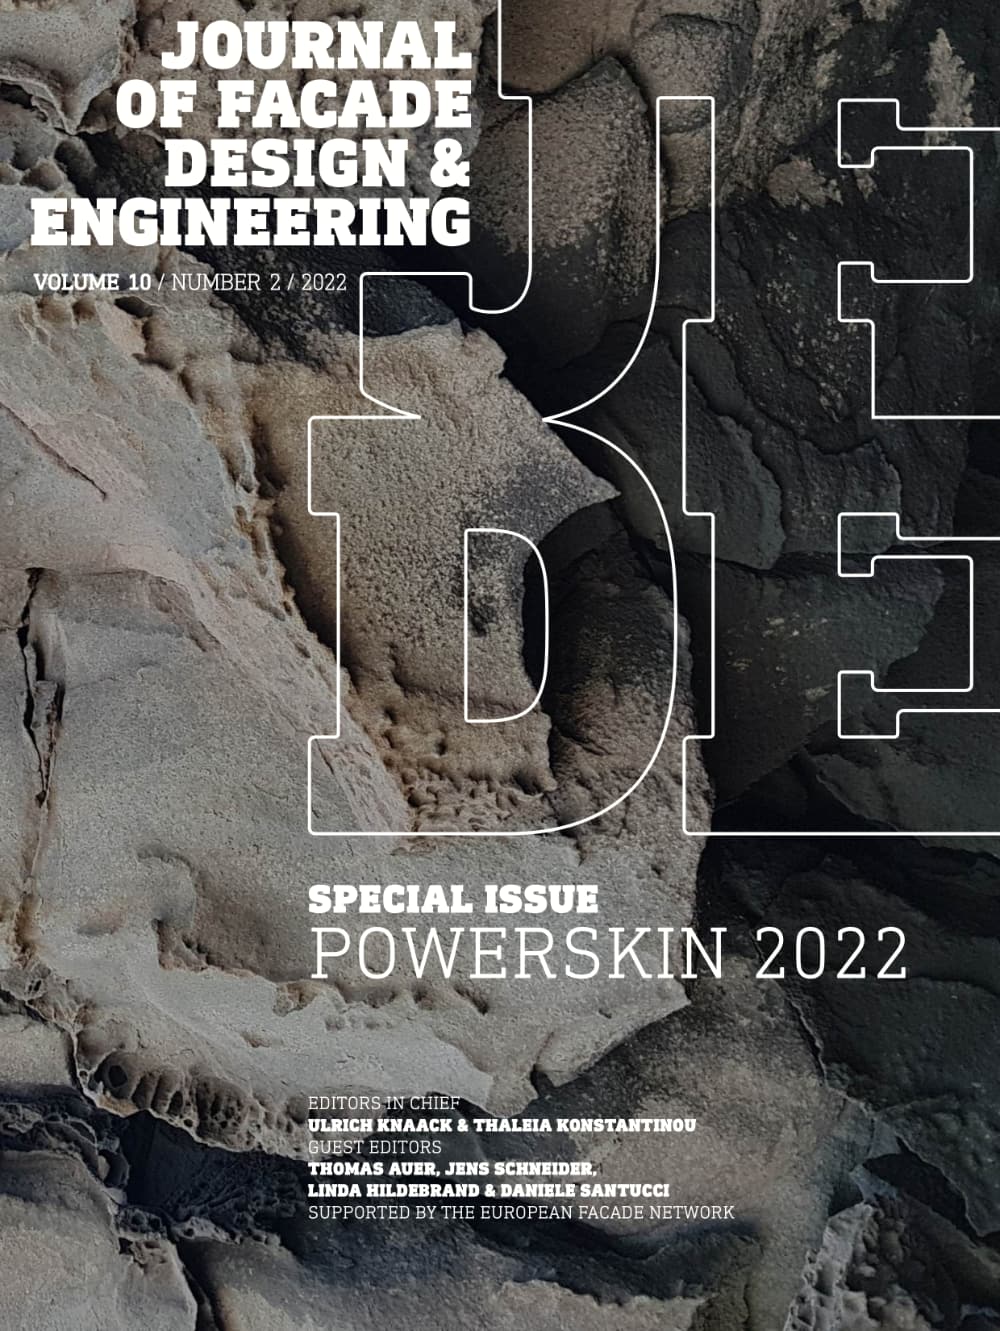 Special Issue Powerskin 2022